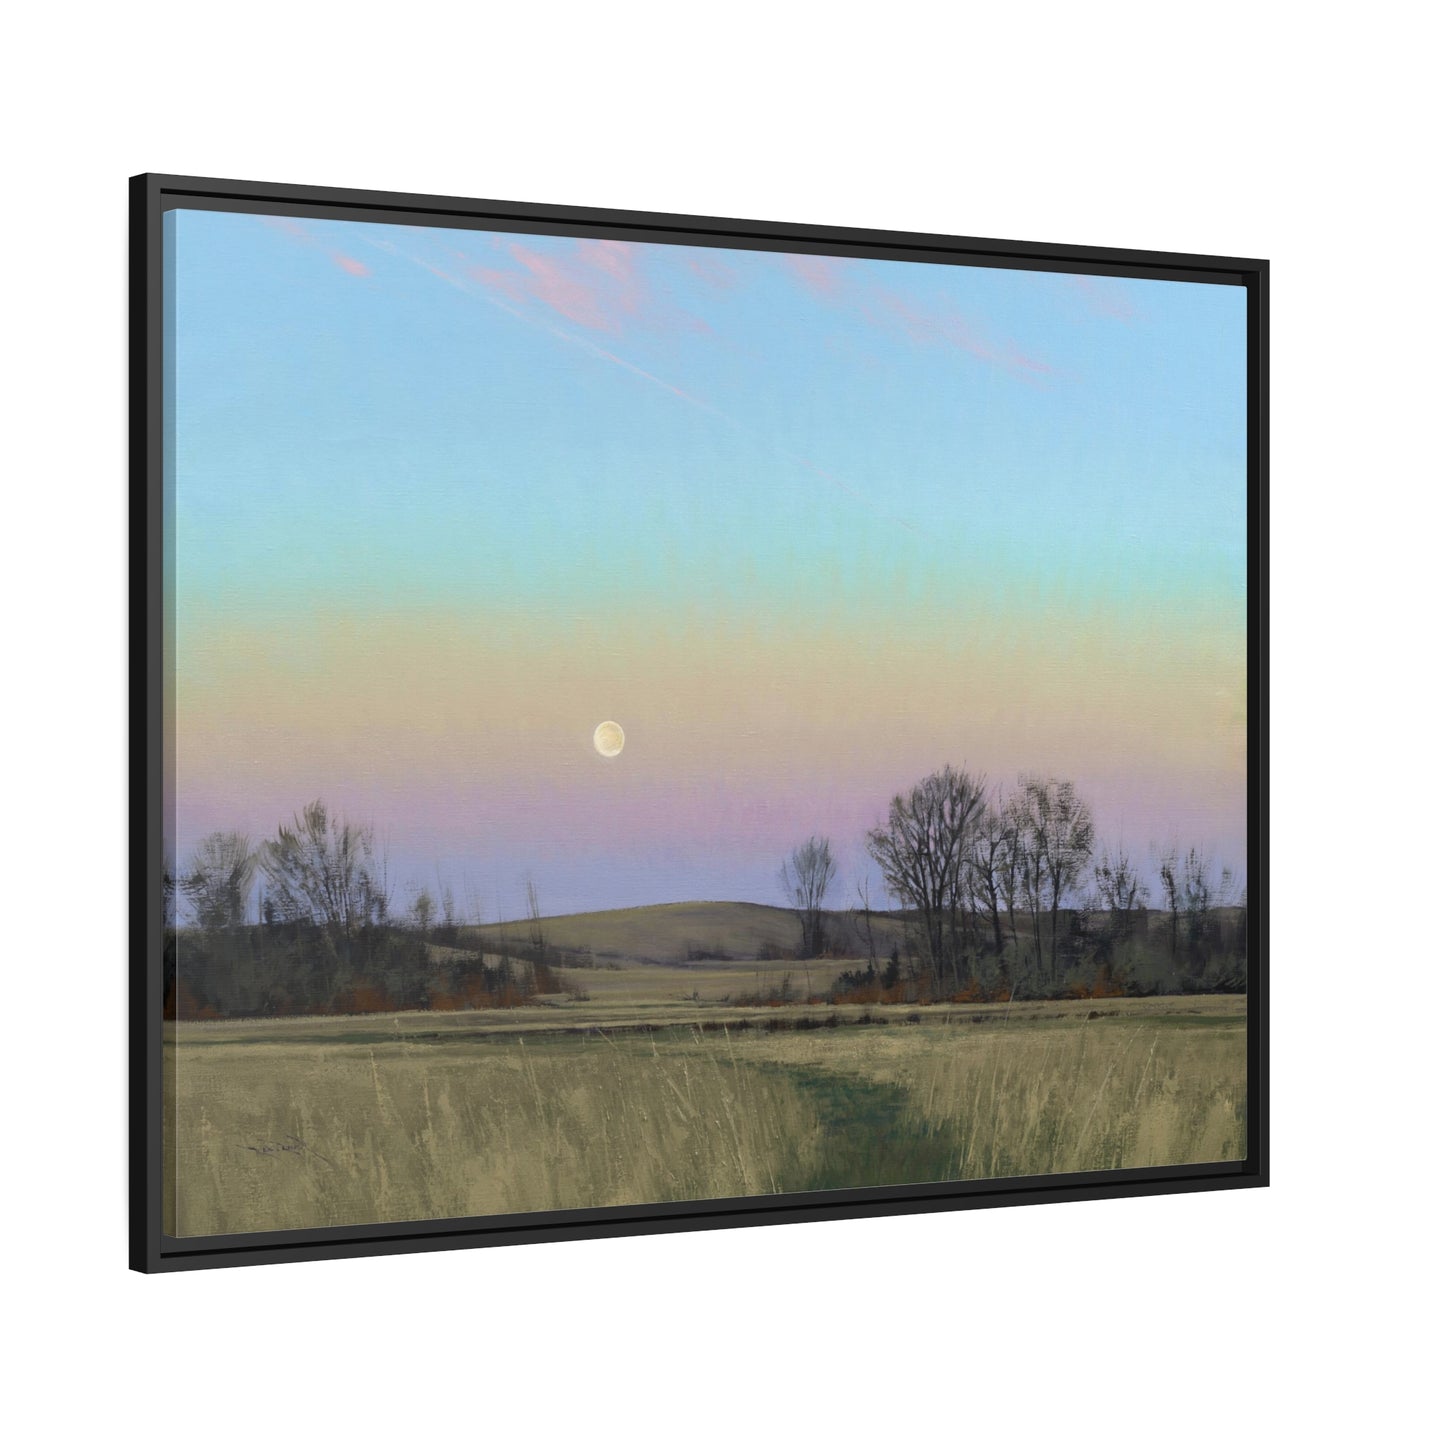 Ben Bauer: "Minnesota Glacial Lakes Area at Dusk" - Framed Canvas Reproduction